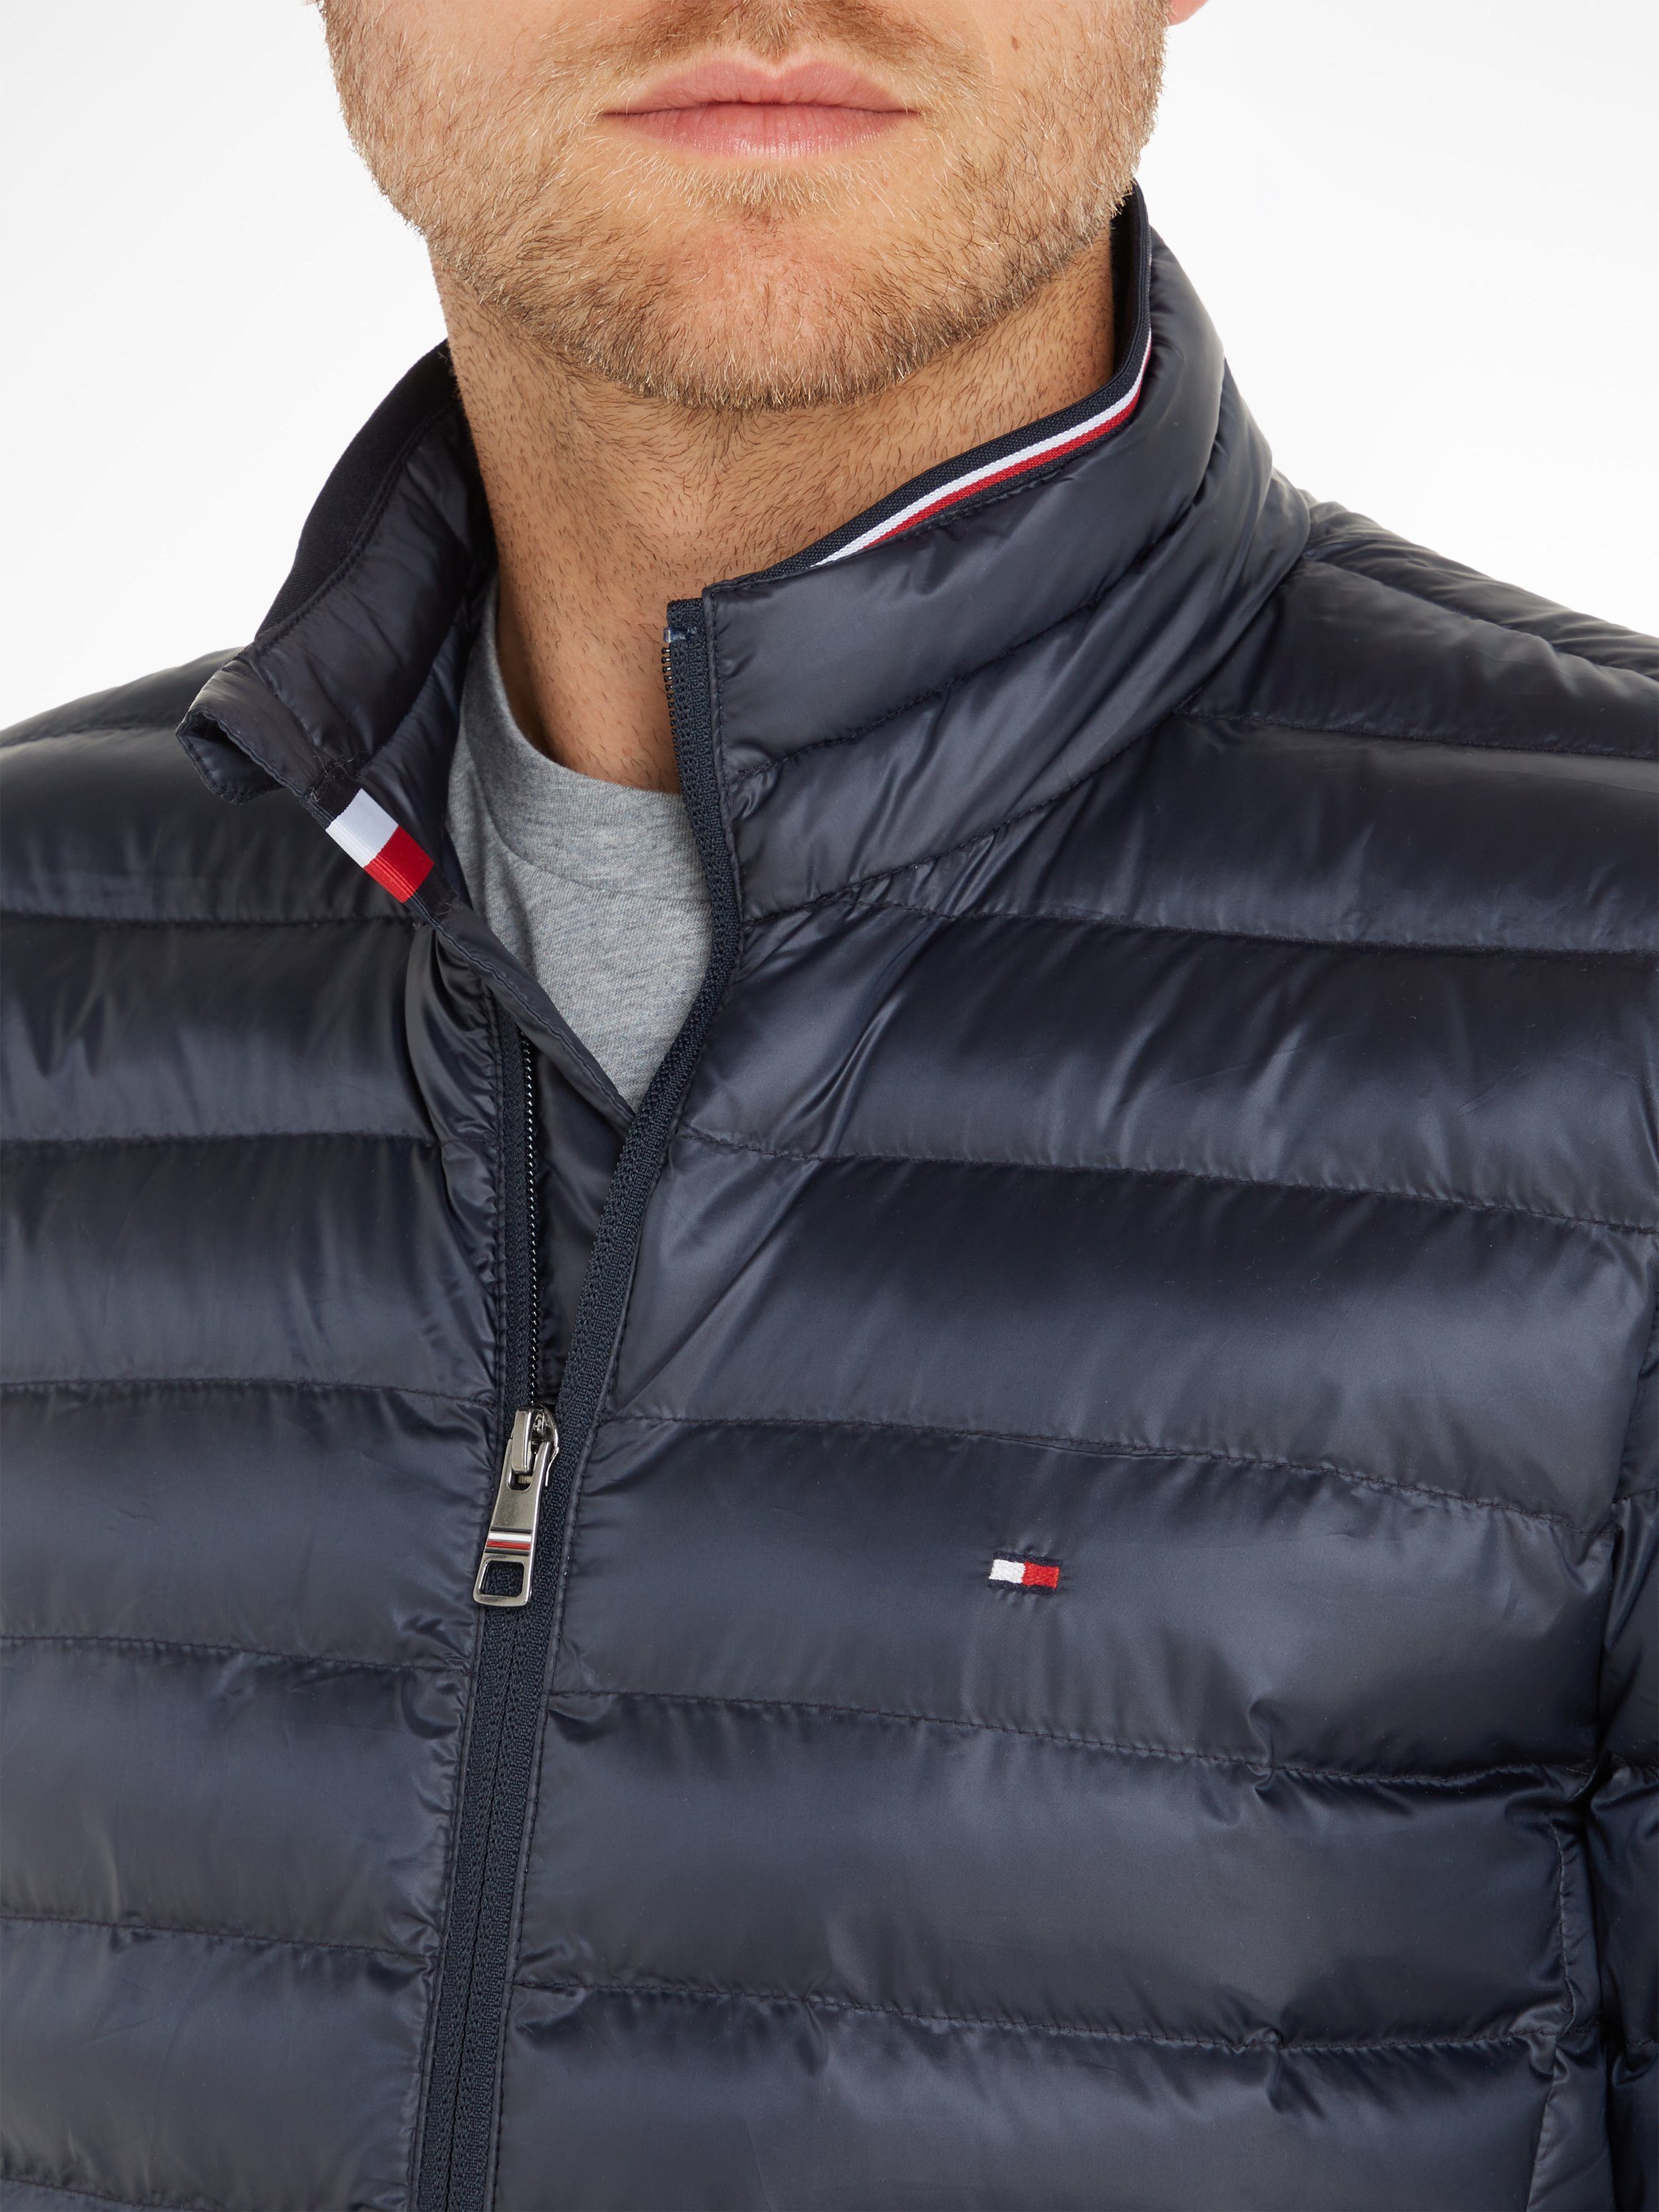 CORE Tommy JACKET desert sky PACKABLE RECYCLED Hilfiger Steppjacke